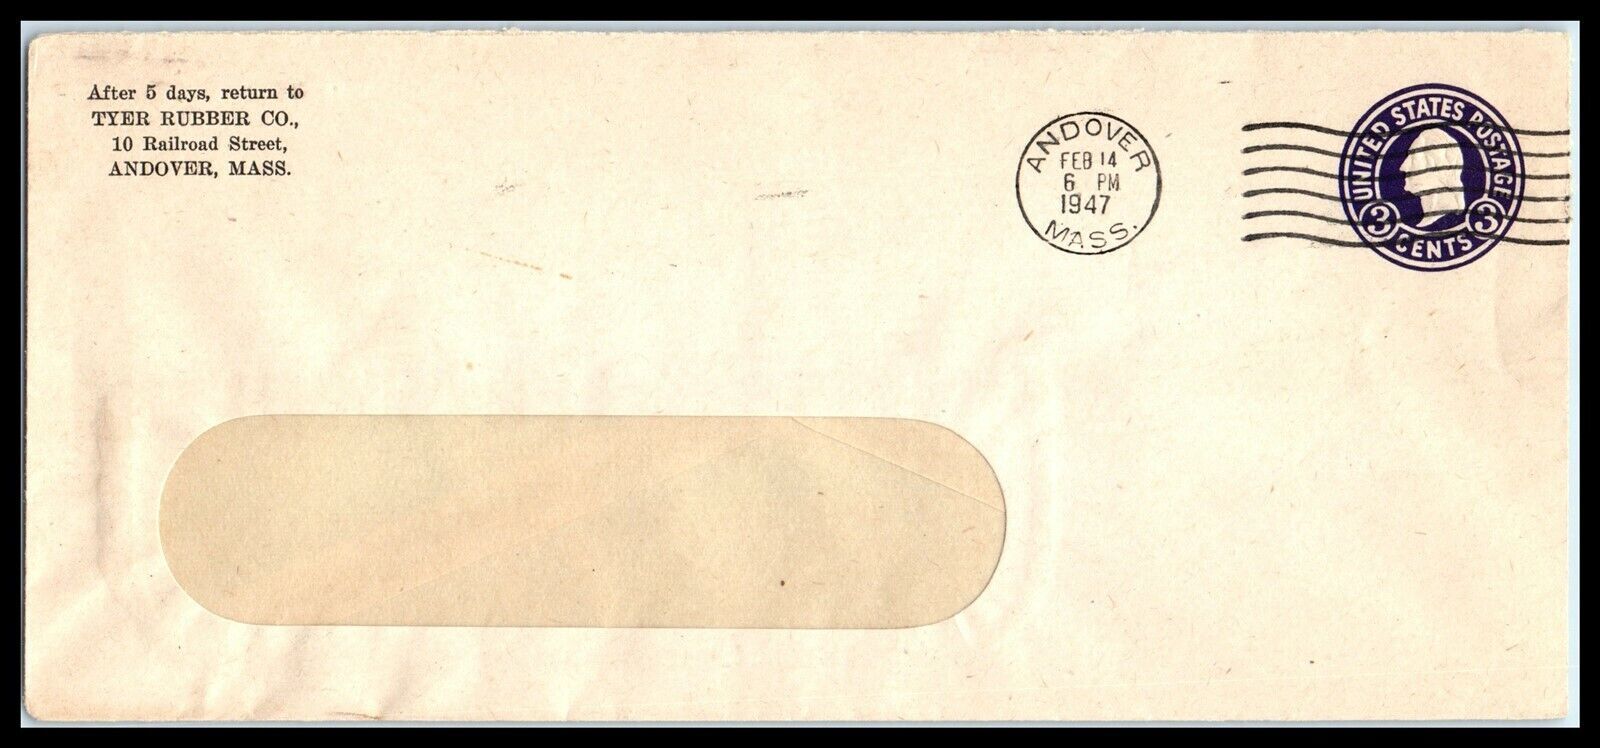 Primary image for 1947 US Cover - Tyer Rubber Co, Andover, Massachusetts D7